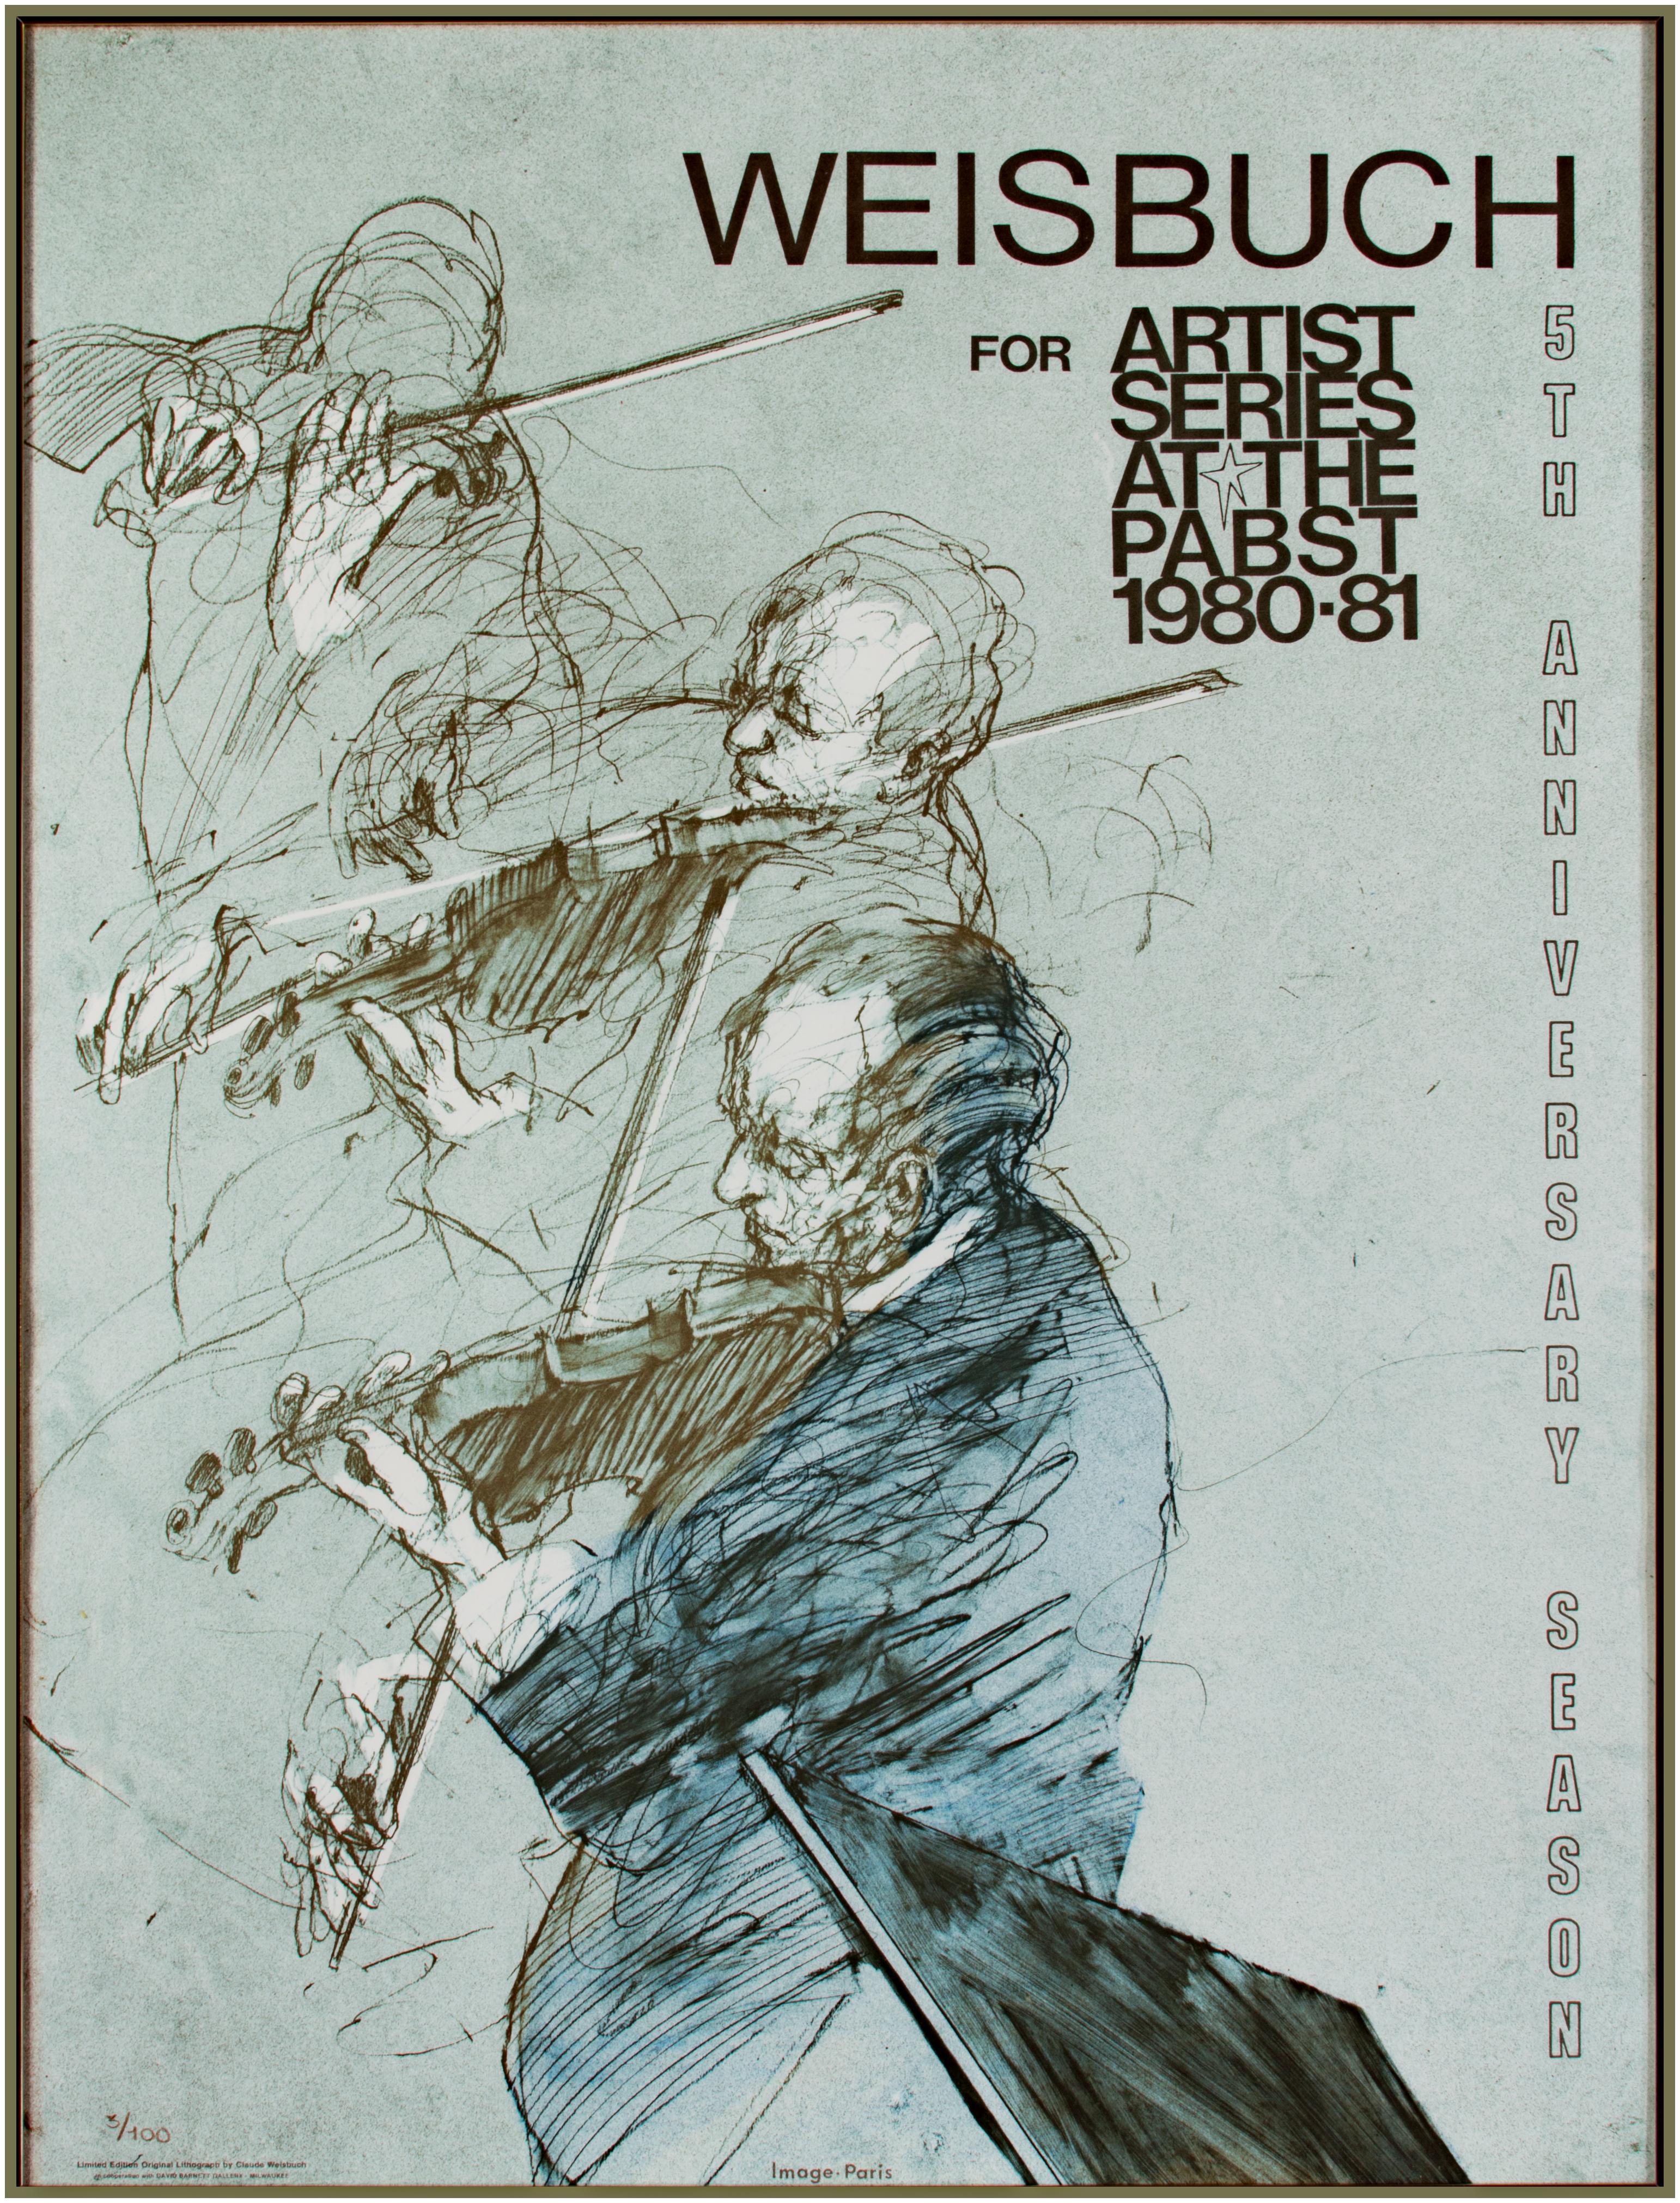 'Artist Series at the Pabst' original lithograph poster, violinists 1980s